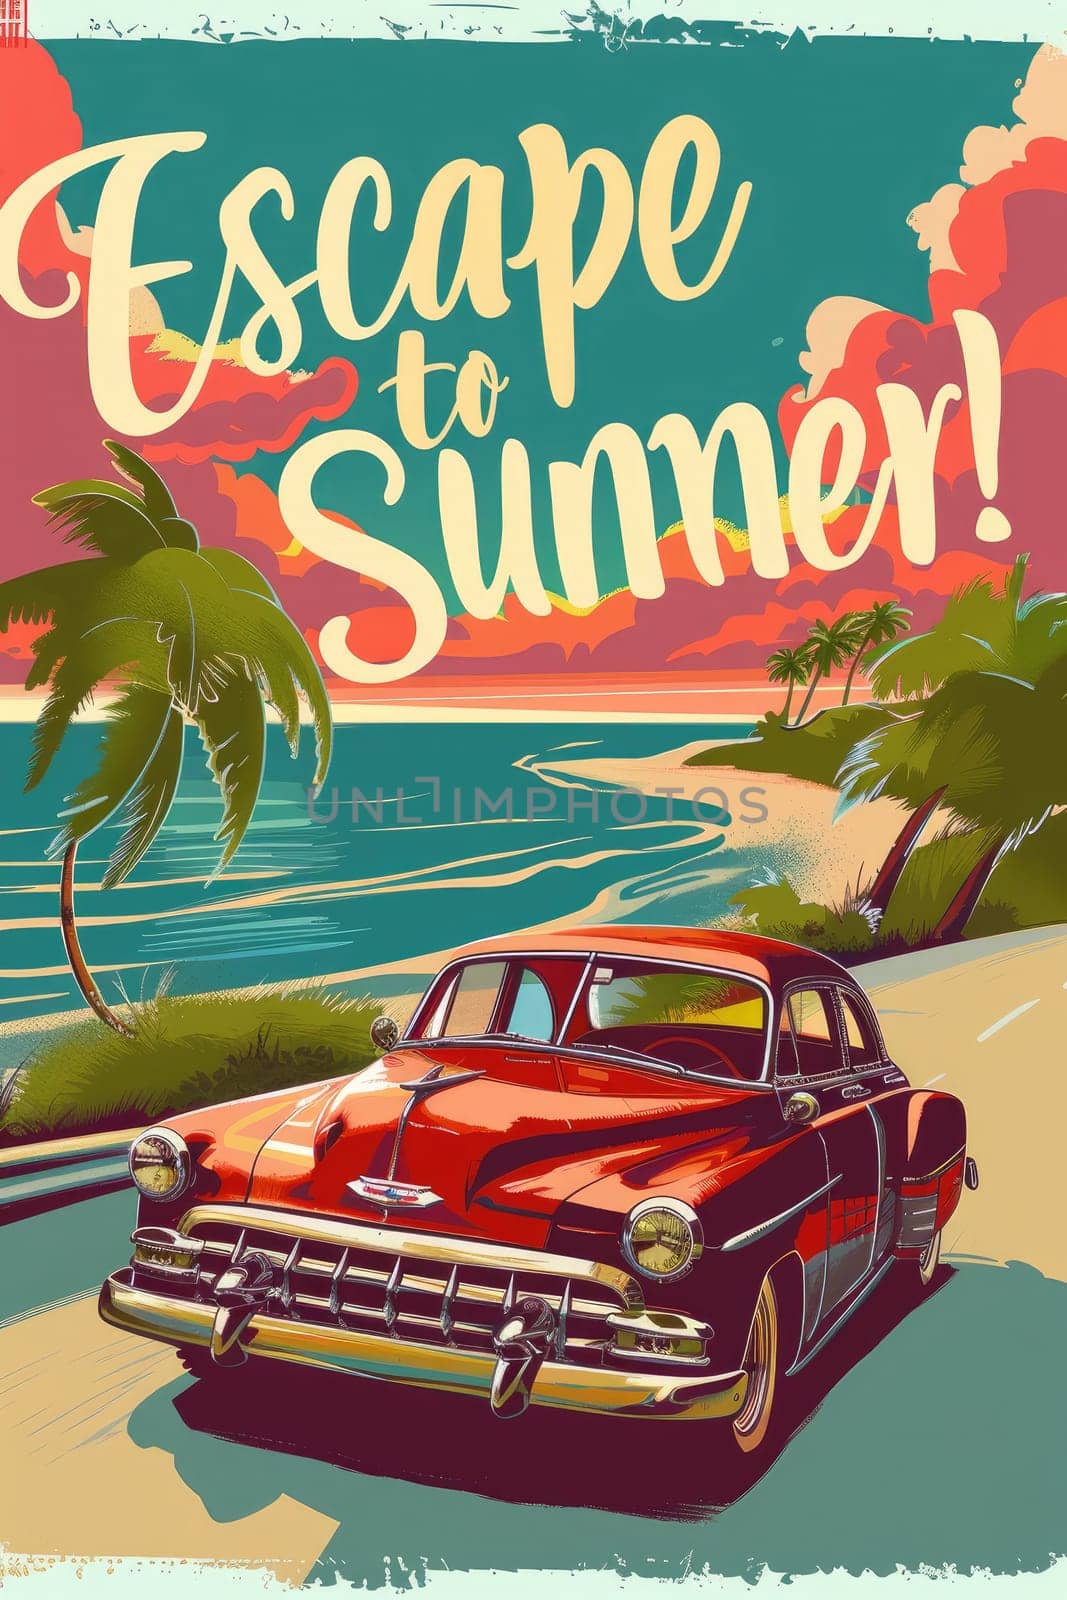 retro-inspired design featuring a classic car cruising down a scenic coastal highway with palmtrees. by Chawagen